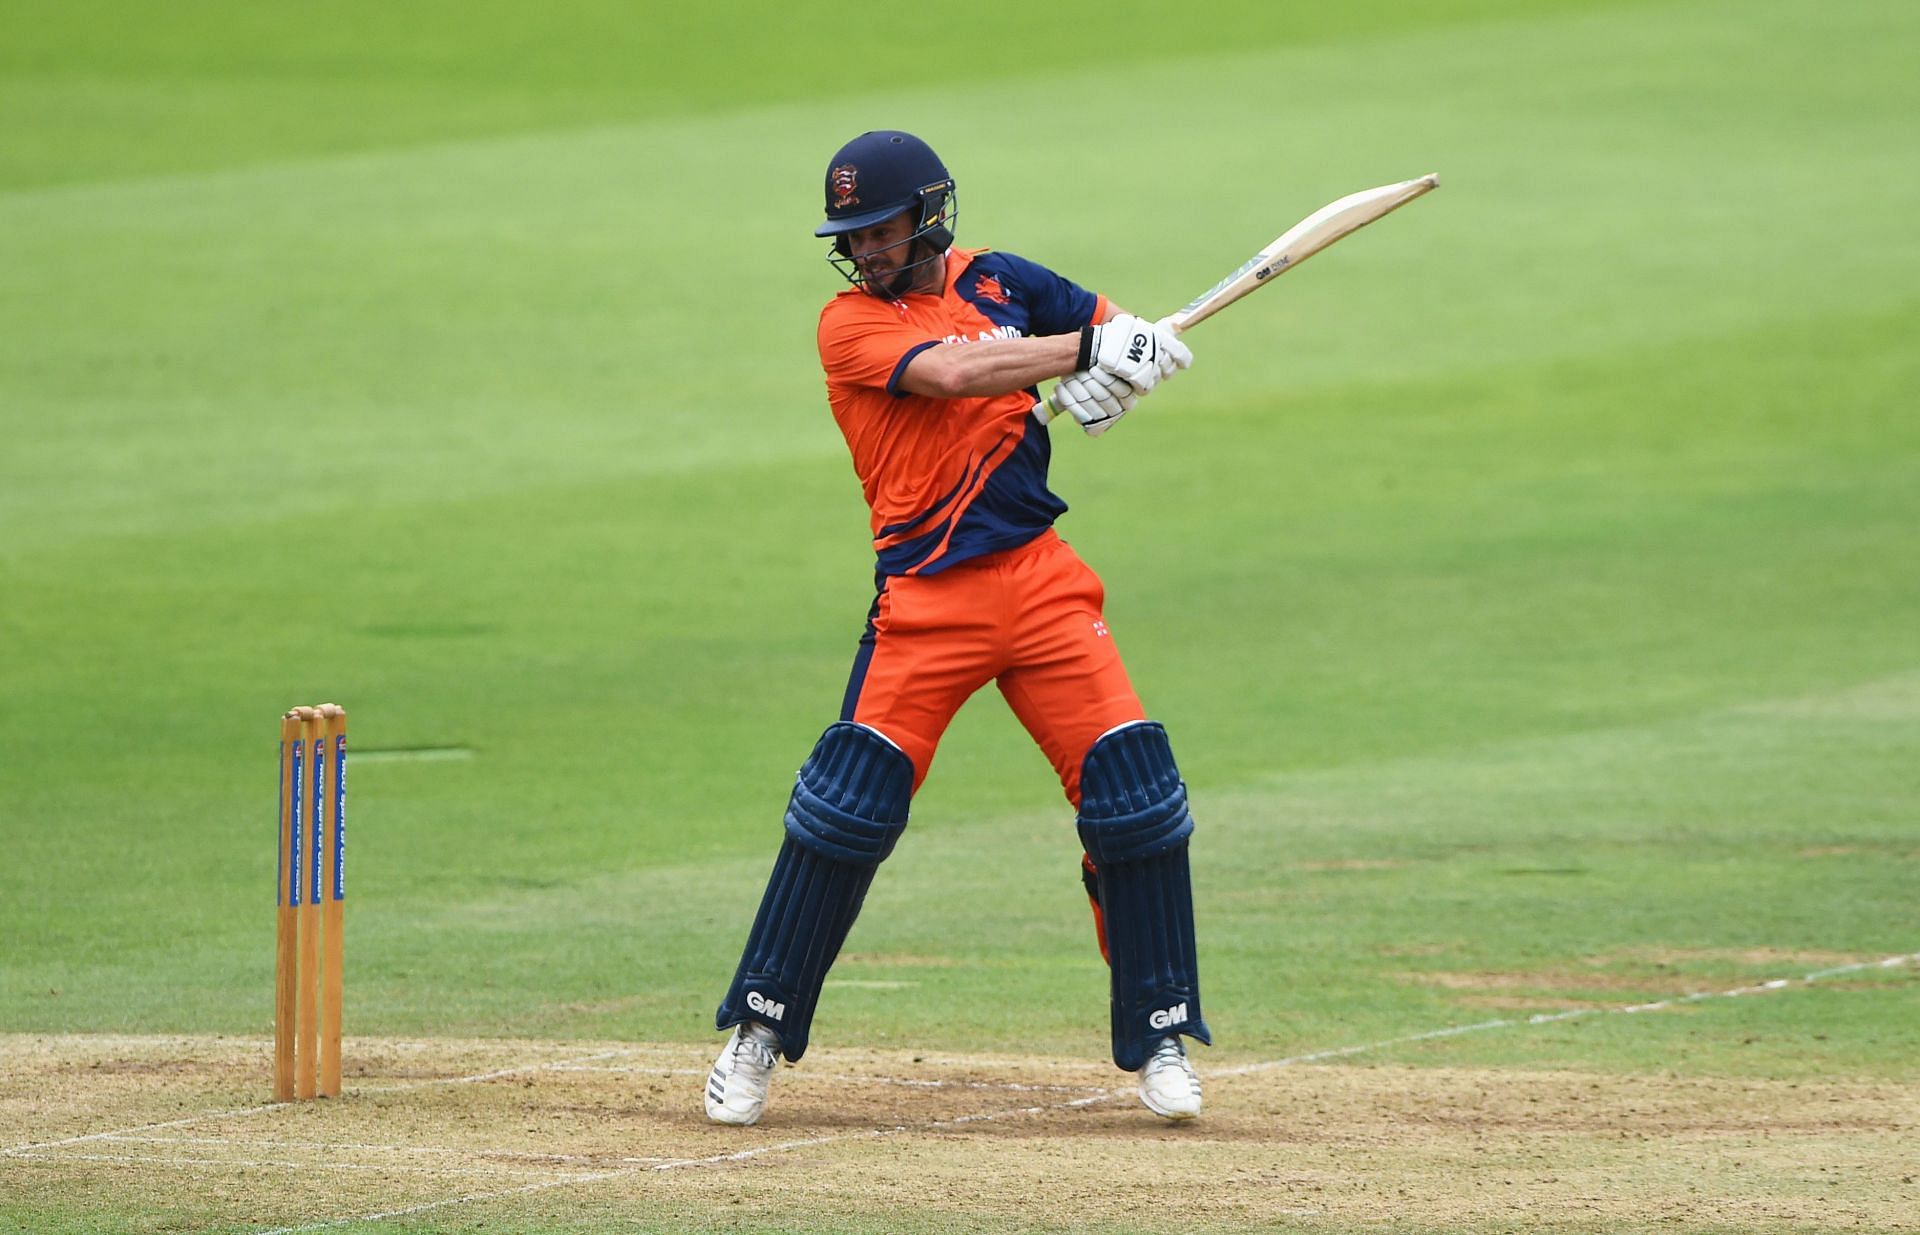 Ryan ten Doeschate played a match-winning knock for the Netherlands in the previous T20I at the Dubai International Cricket Stadium